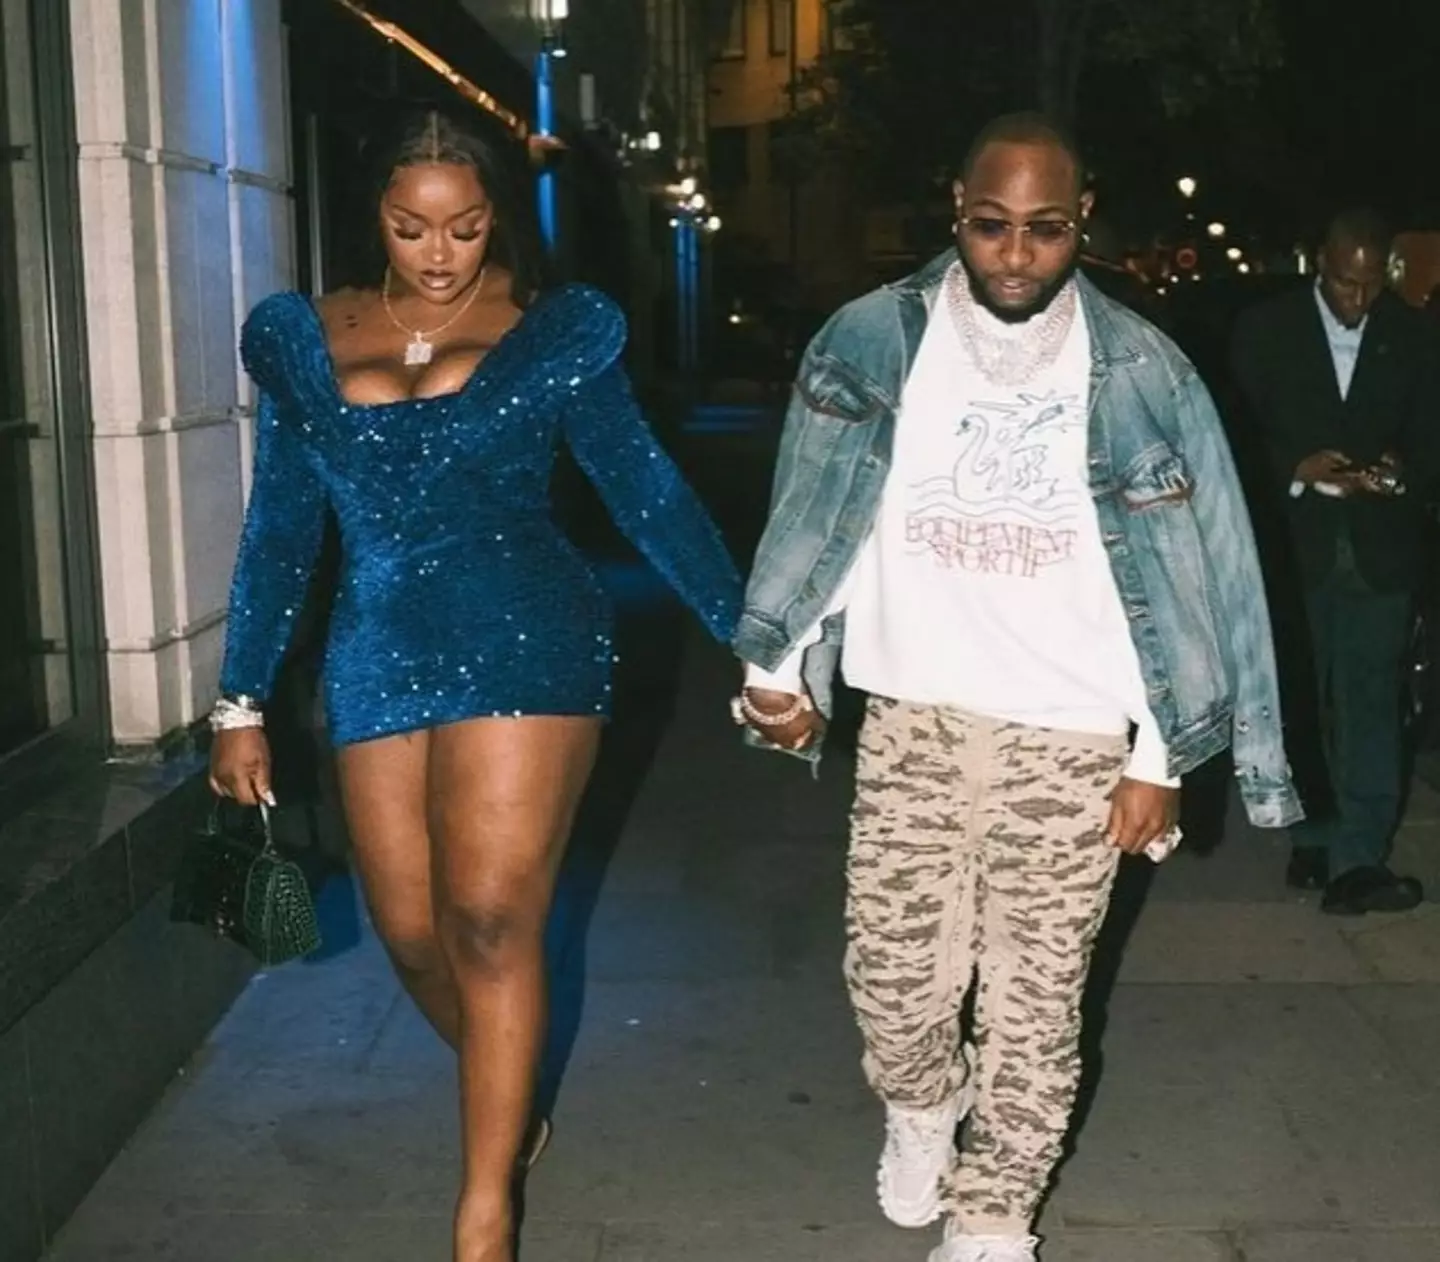 Many have offered their condolences to Davido and Chioma Rowland following their tragic loss.